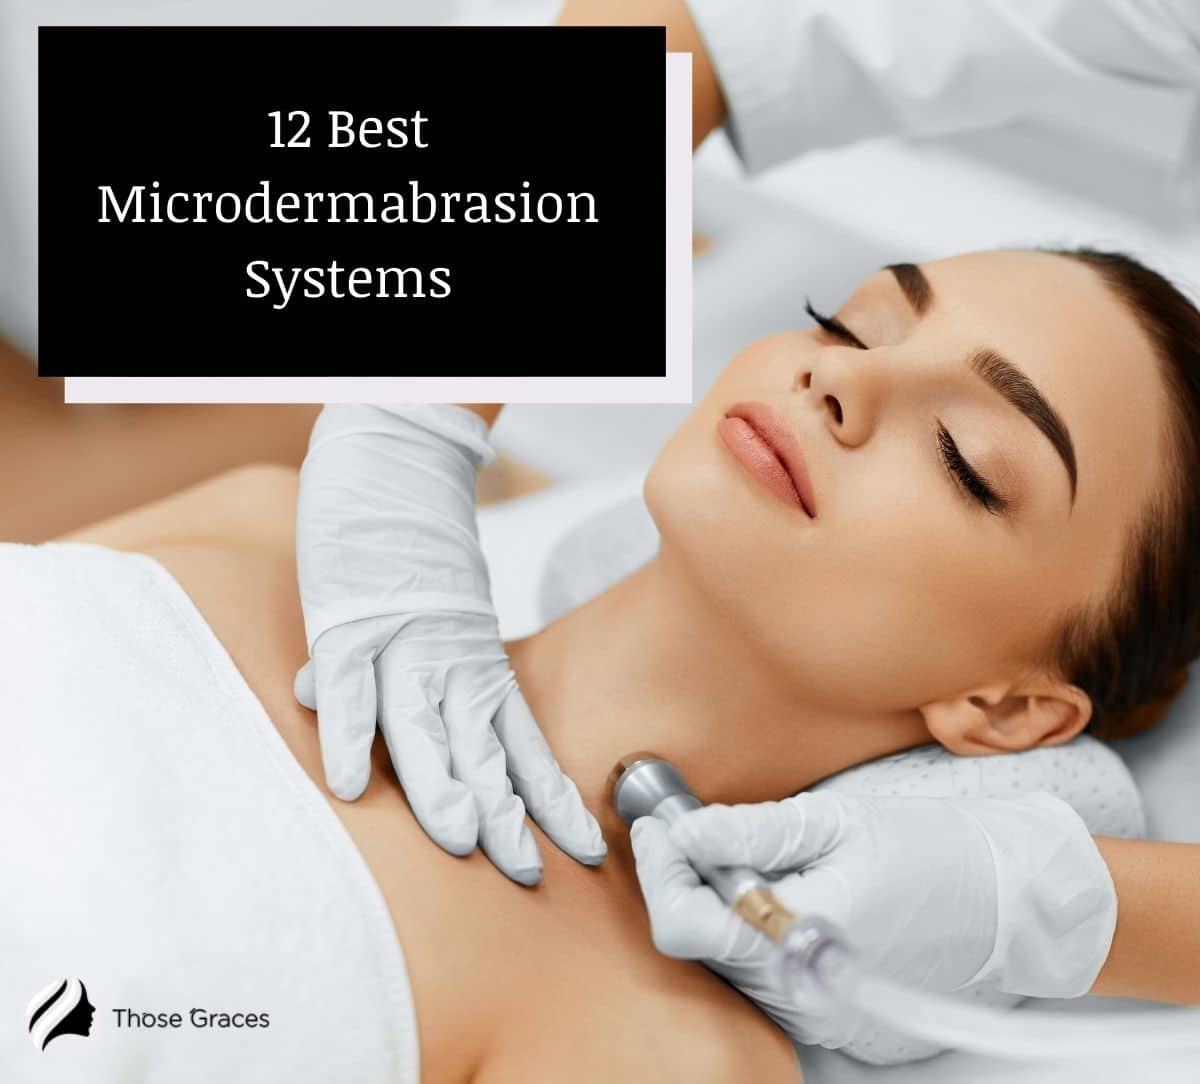 woman getting Best Microdermabrasion Systems treatment